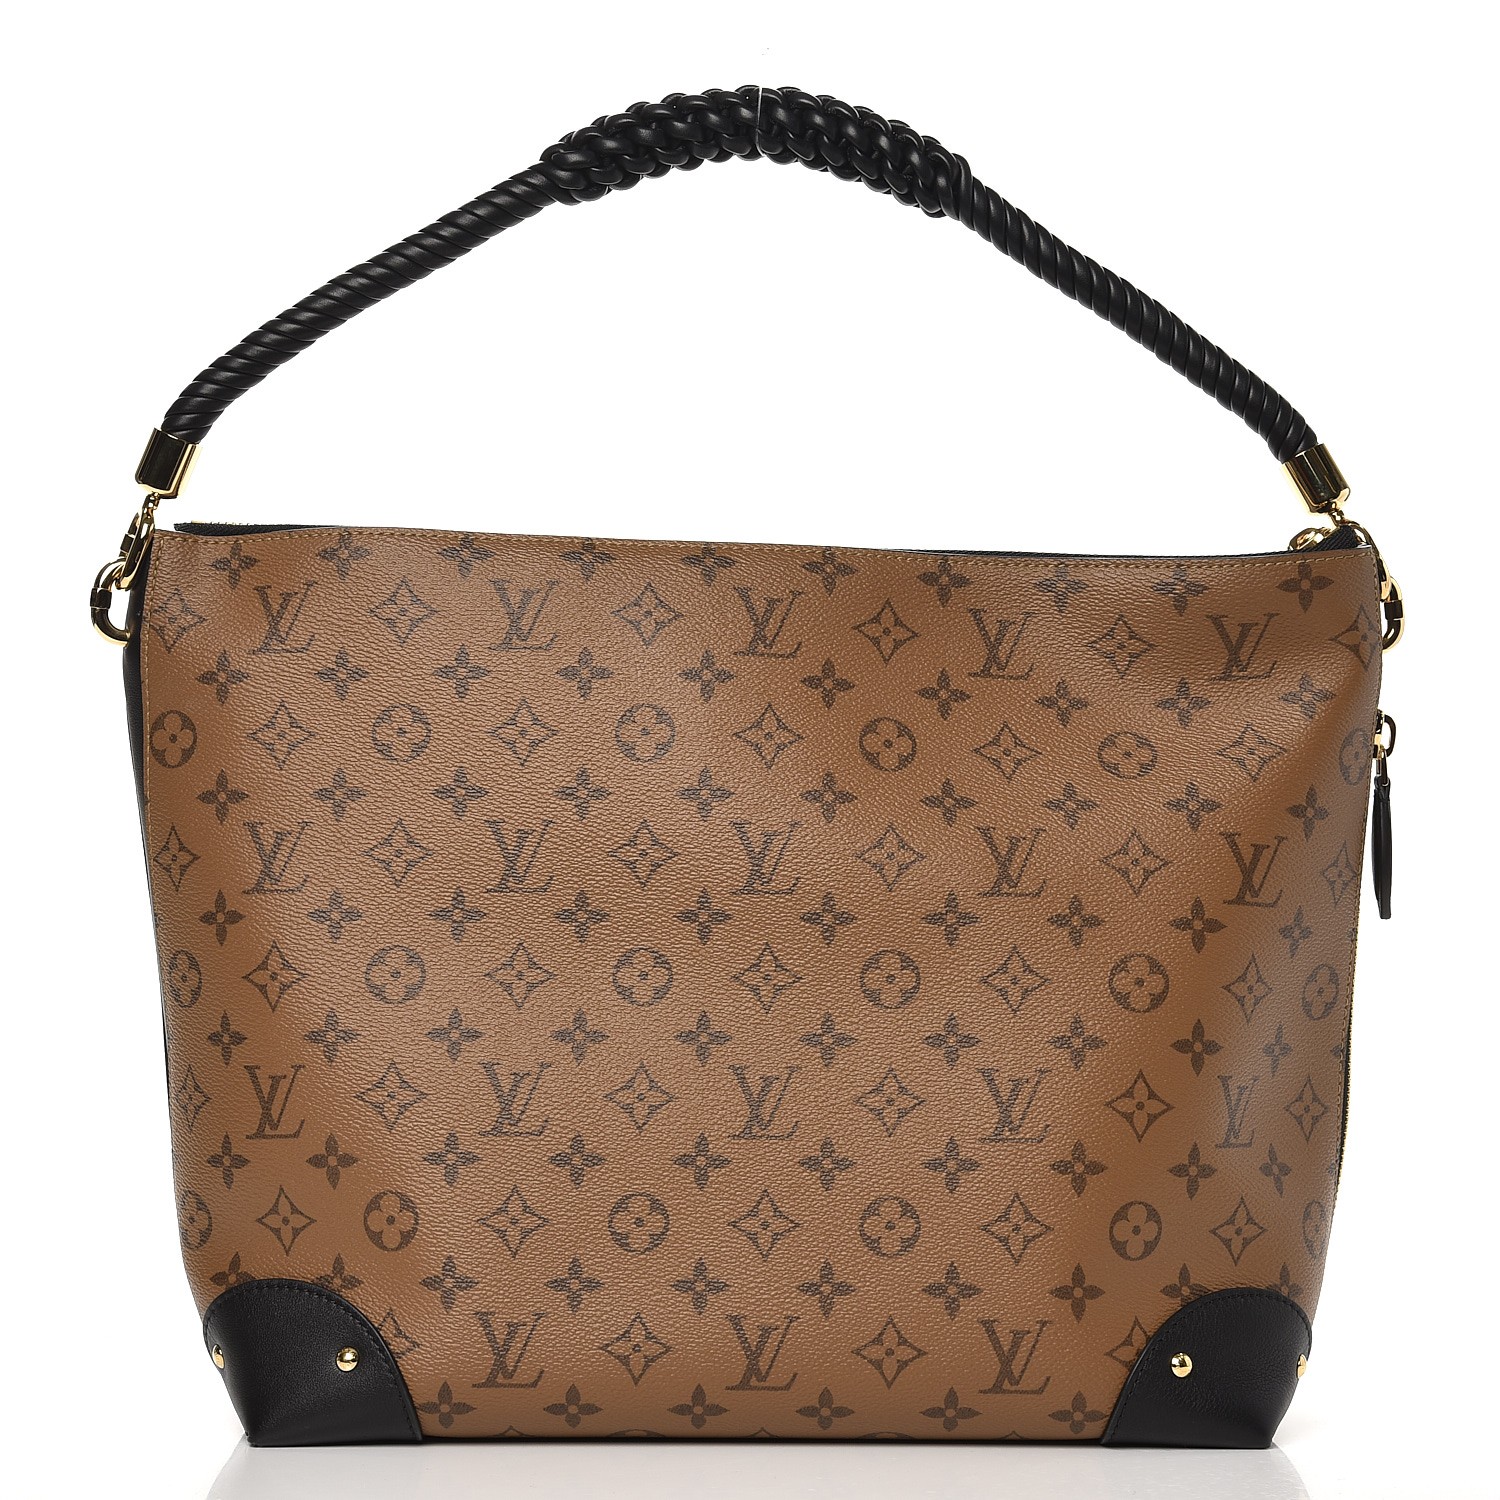 Vintage(60's/70's) Louis Vuitton Monogram Triangle Bag for Sale in